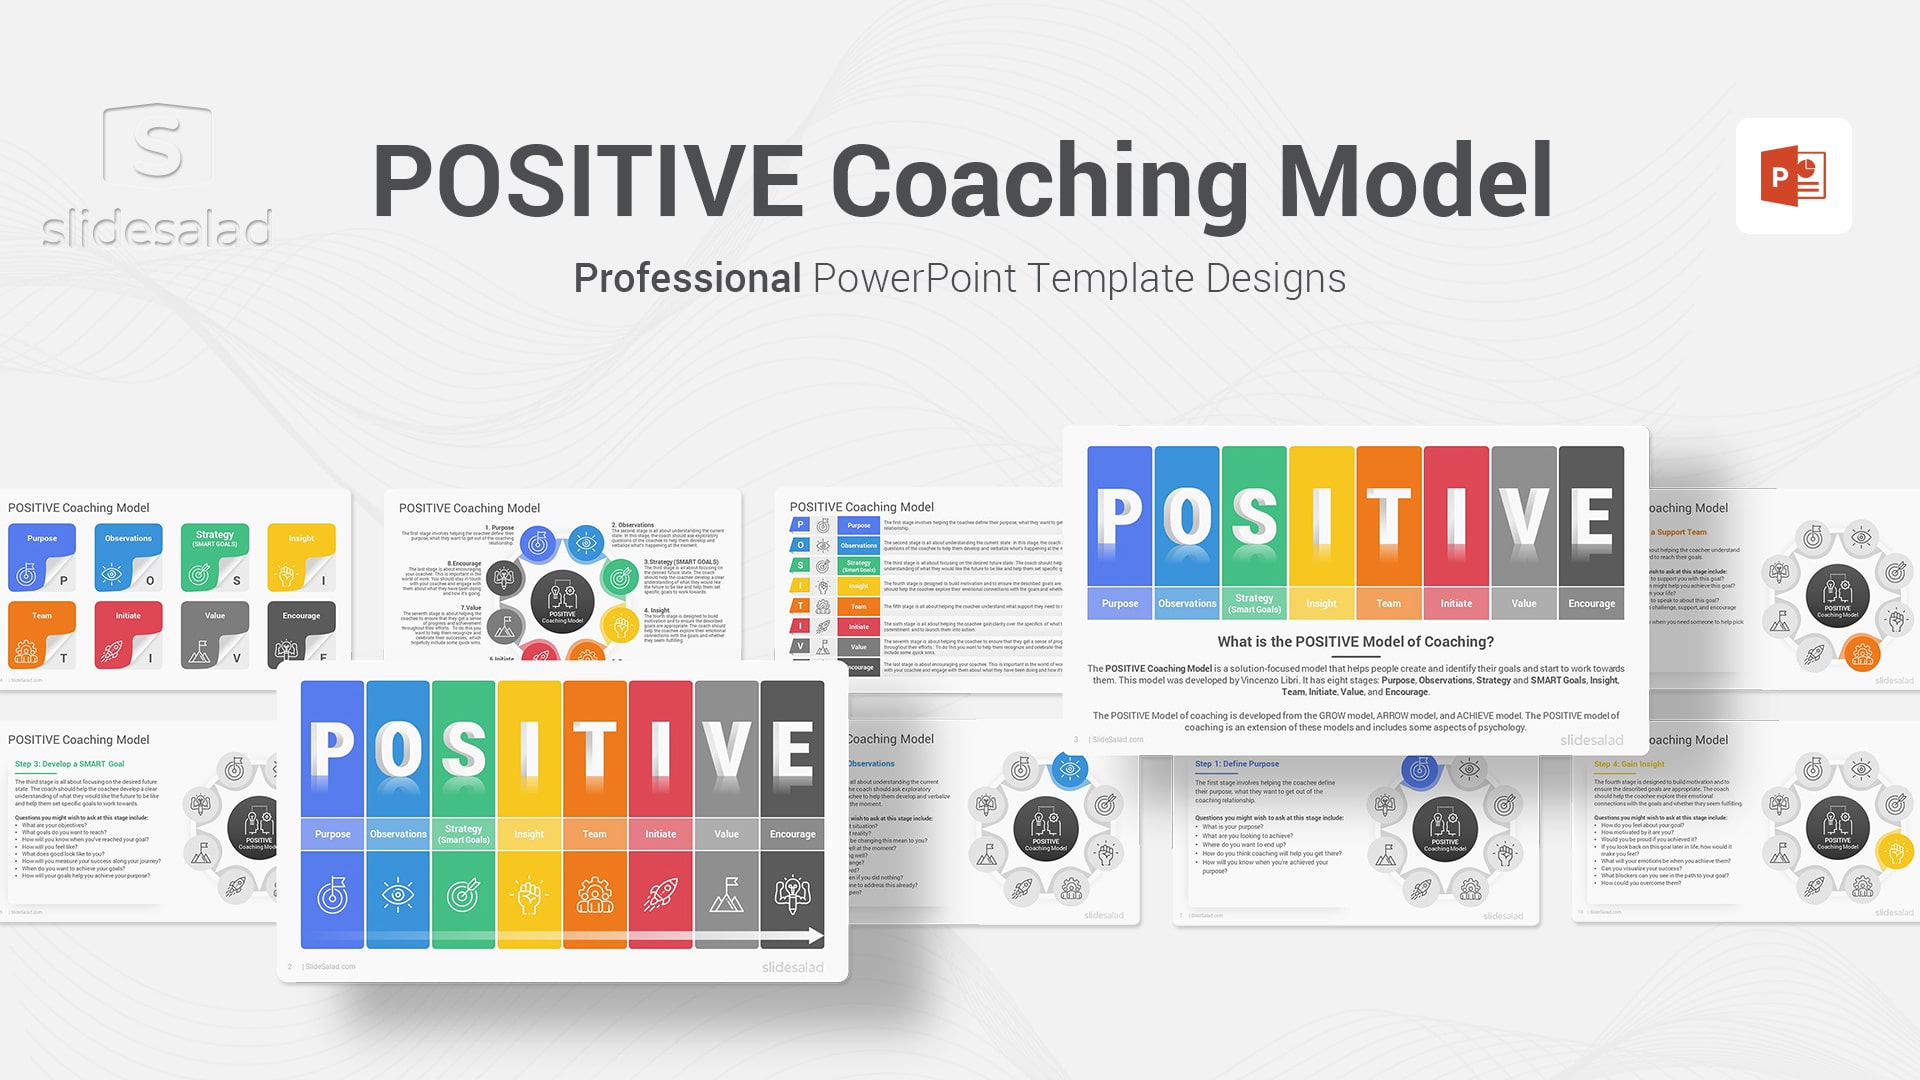 POSITIVE Coaching Model PowerPoint Template - Excite People About Fulfilling Their Potential